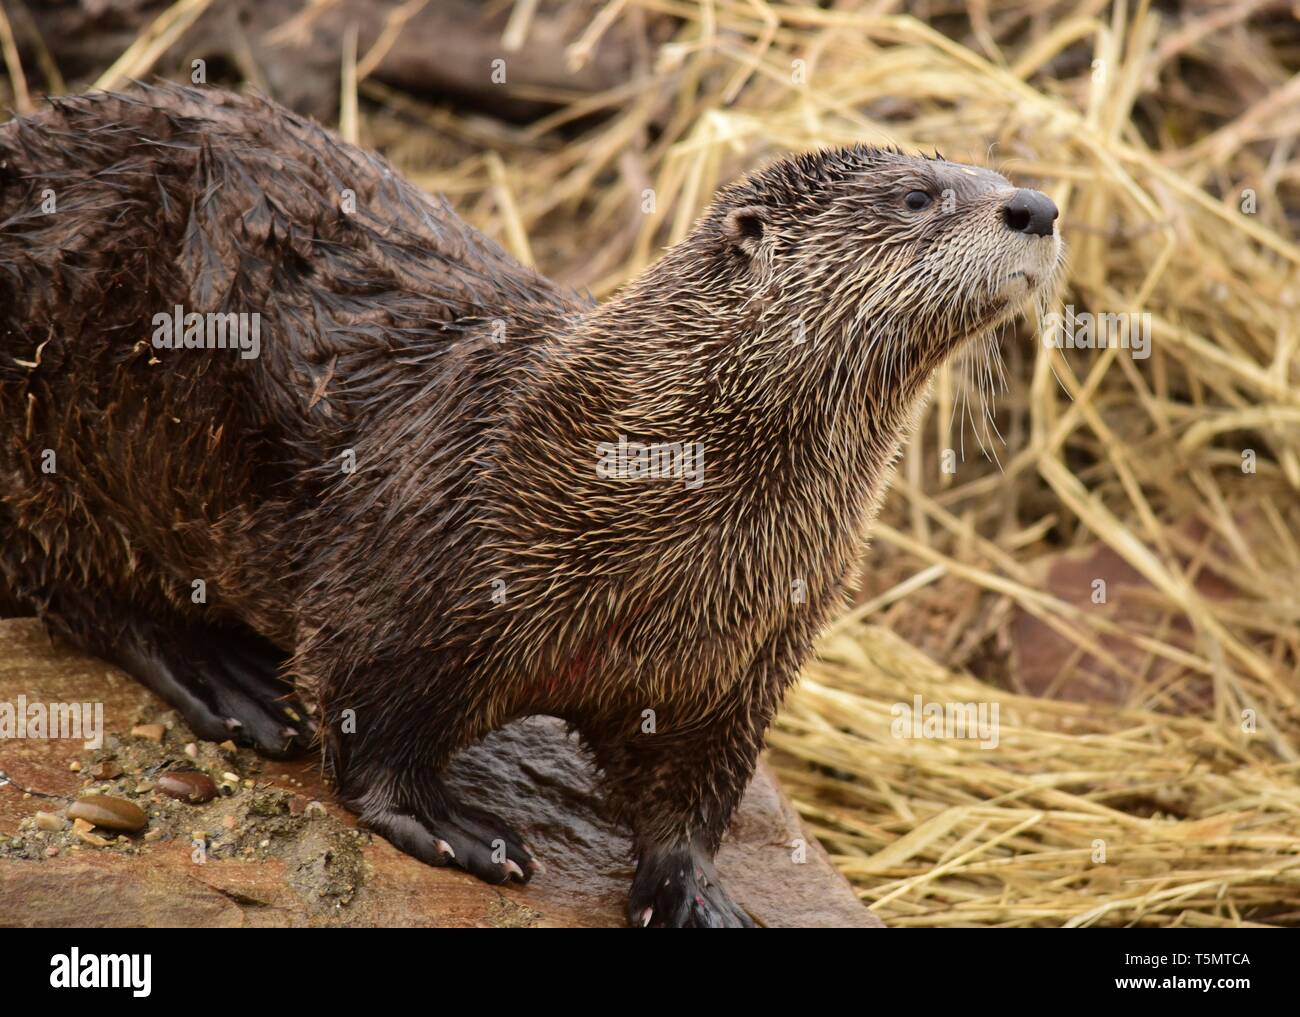 A North American river otter along the Green River in spring at Seedskadee National Wildlife Refuge in Sweetwater County, Wyoming. River otters are common in the wildlife refugee but are difficult to view as they are fearful of humans. Stock Photo